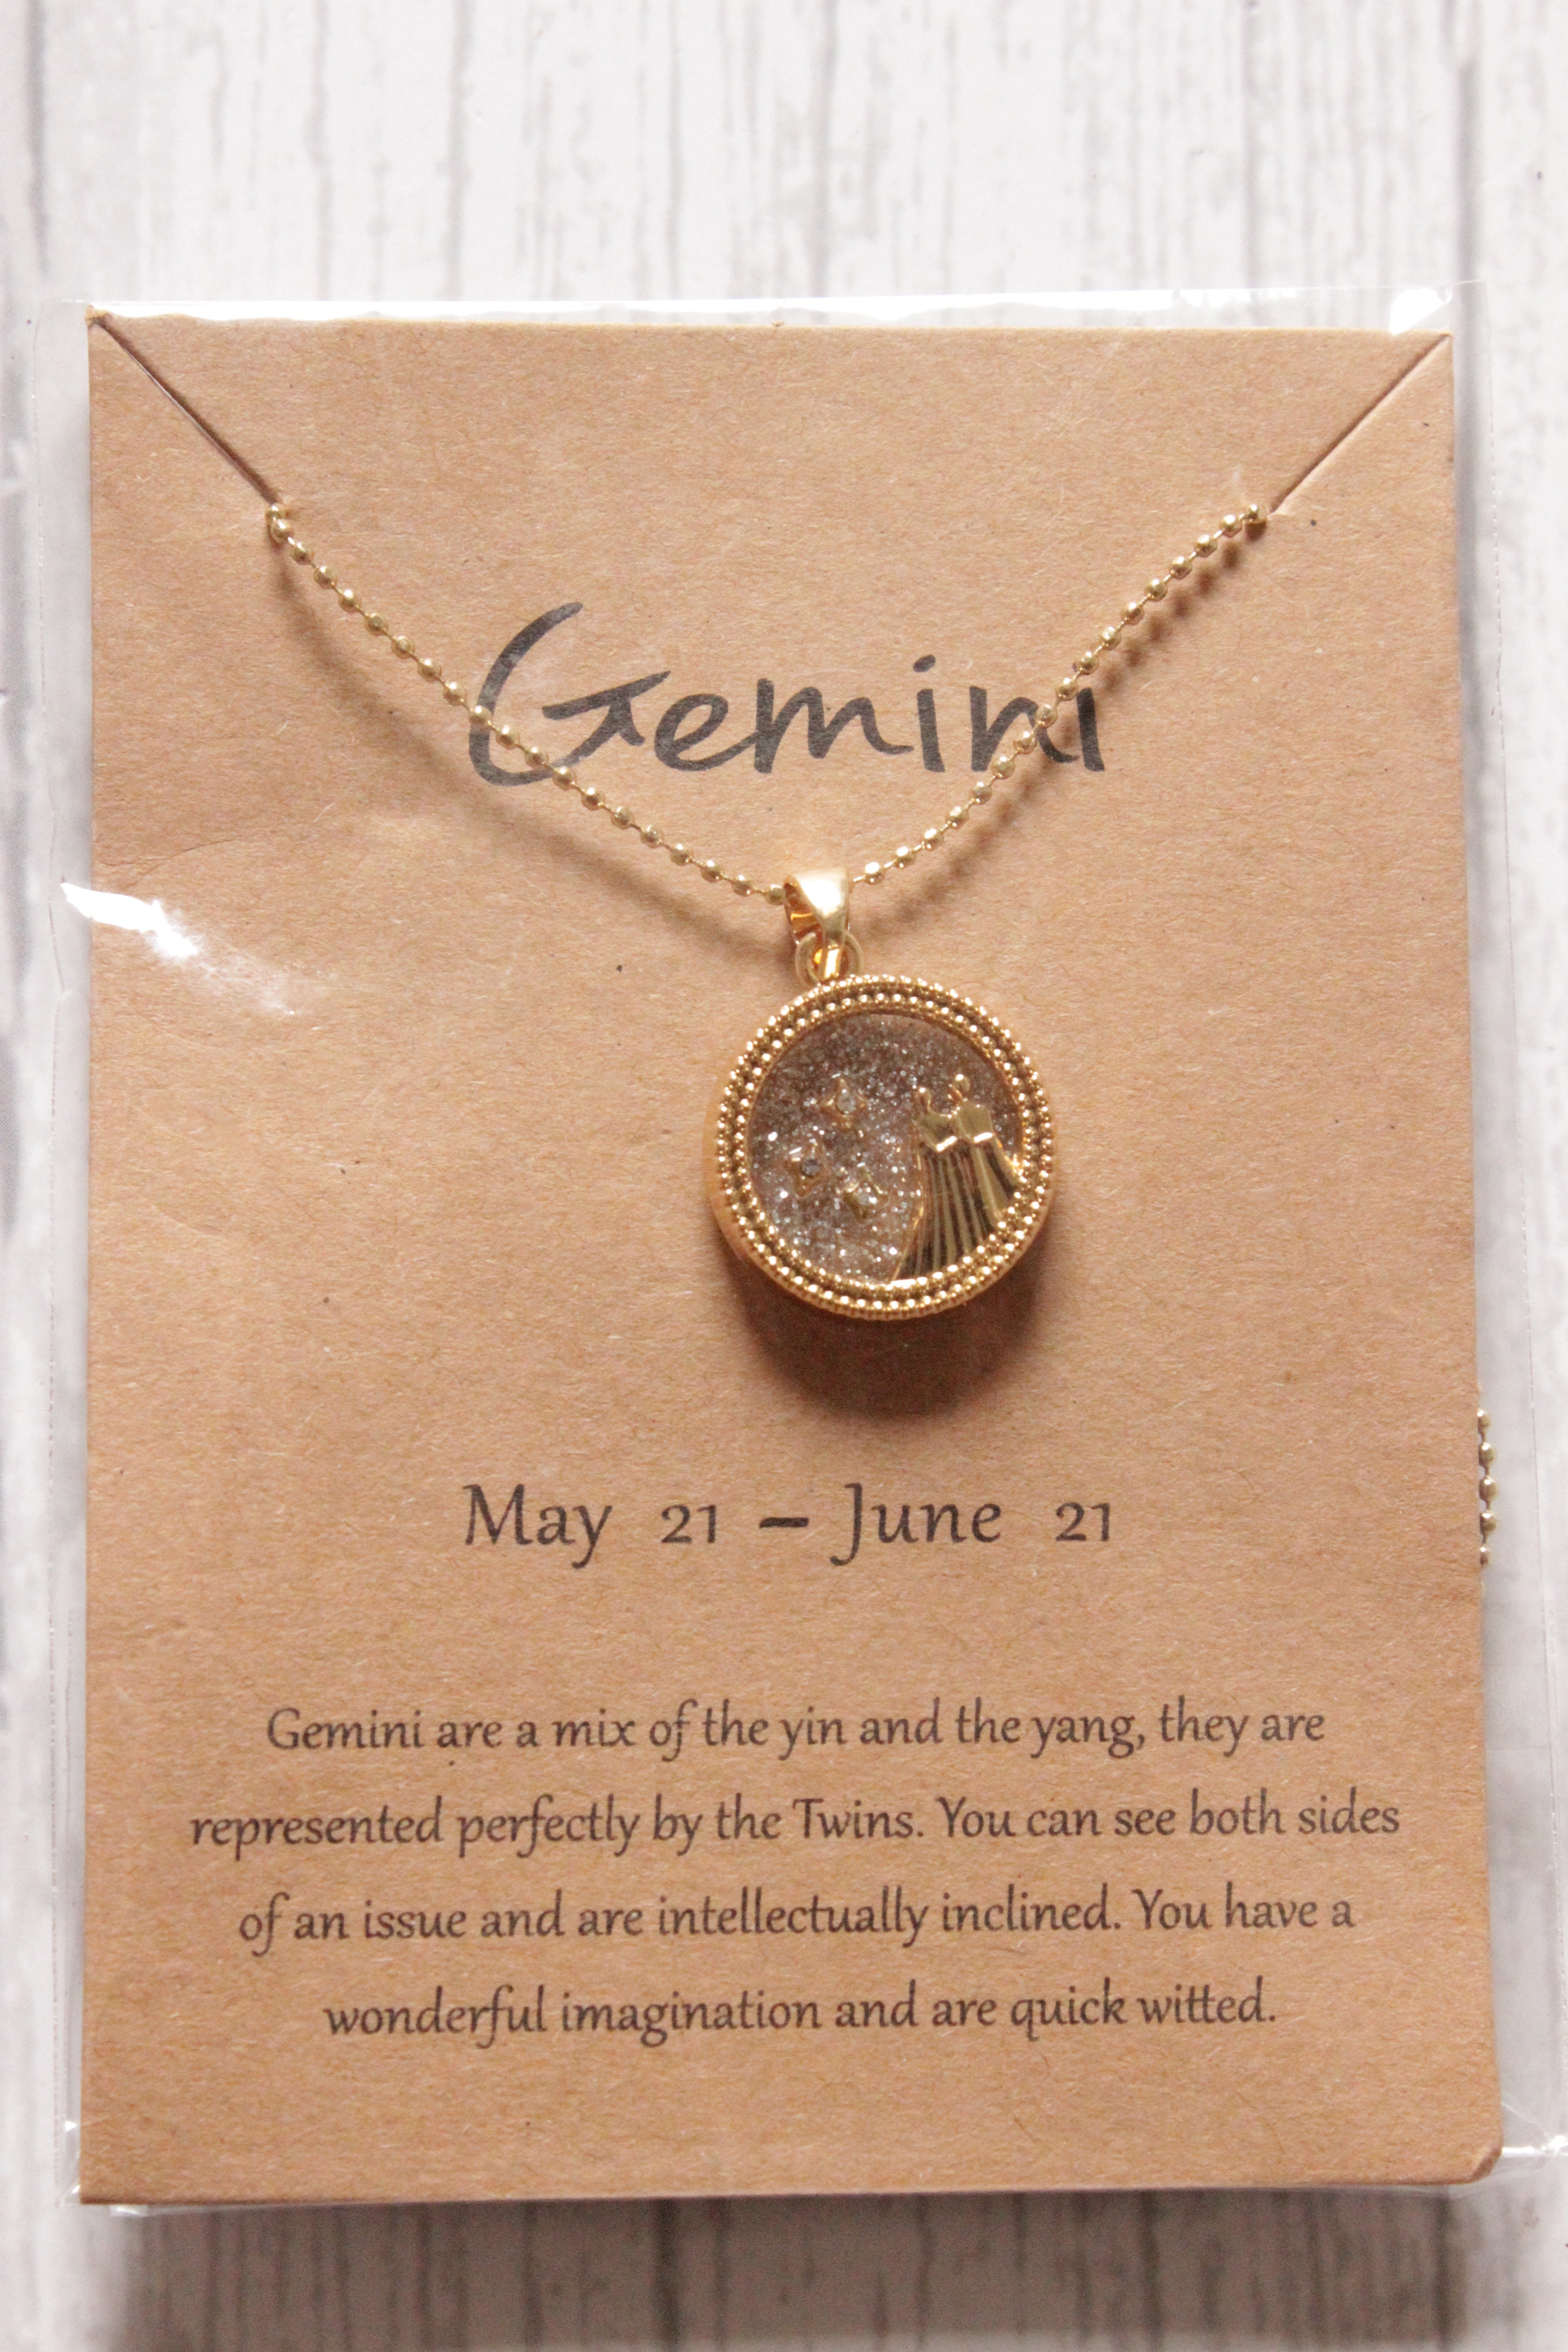 Gemini Sun Sign Gold Plated Day Style Round Resin Horoscope Astrology Minimalist Pendant Necklace with Card